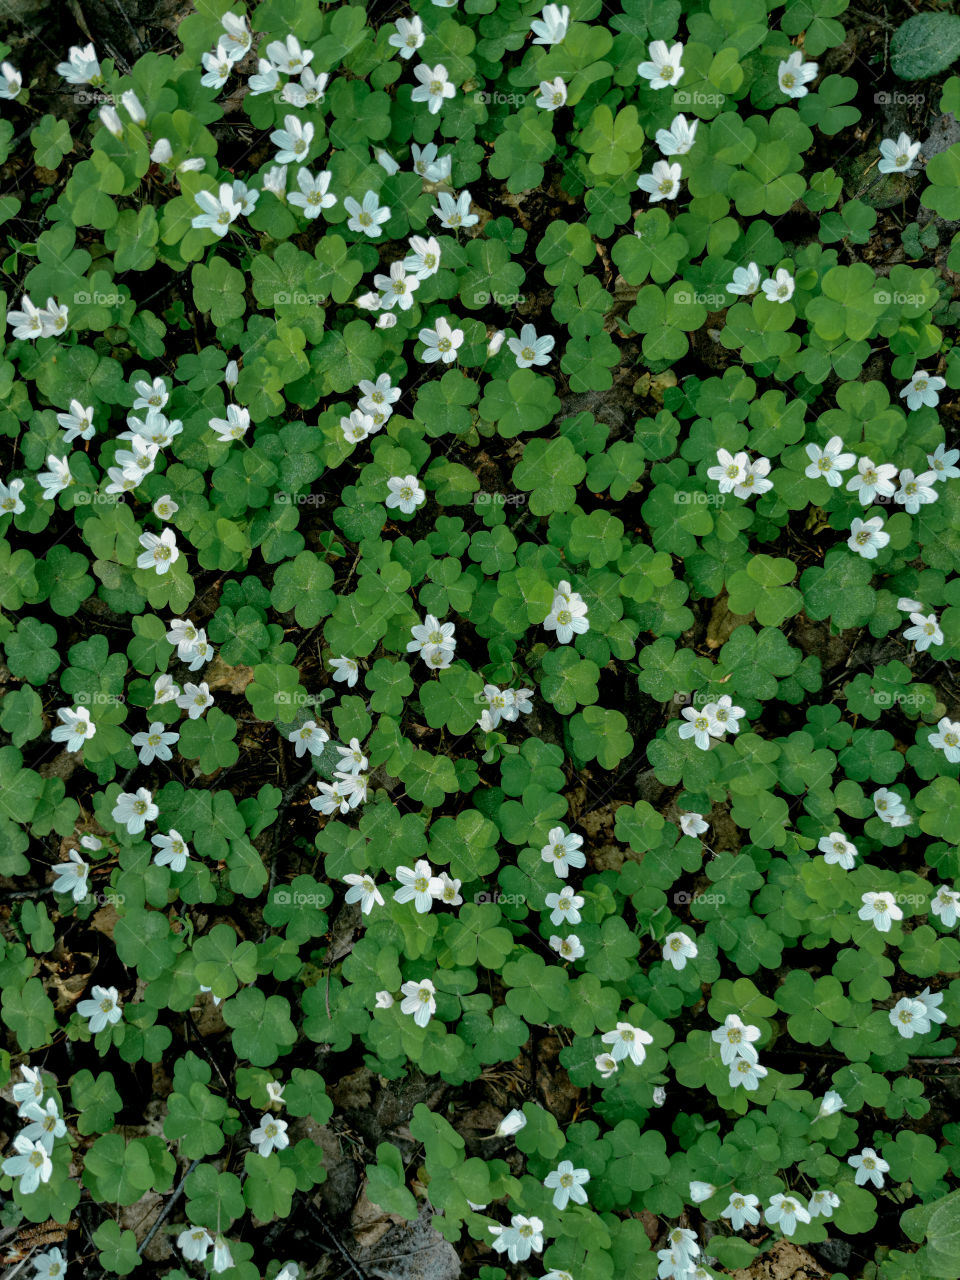 White oxalis wildflowers and green leaves as seen from standing over them